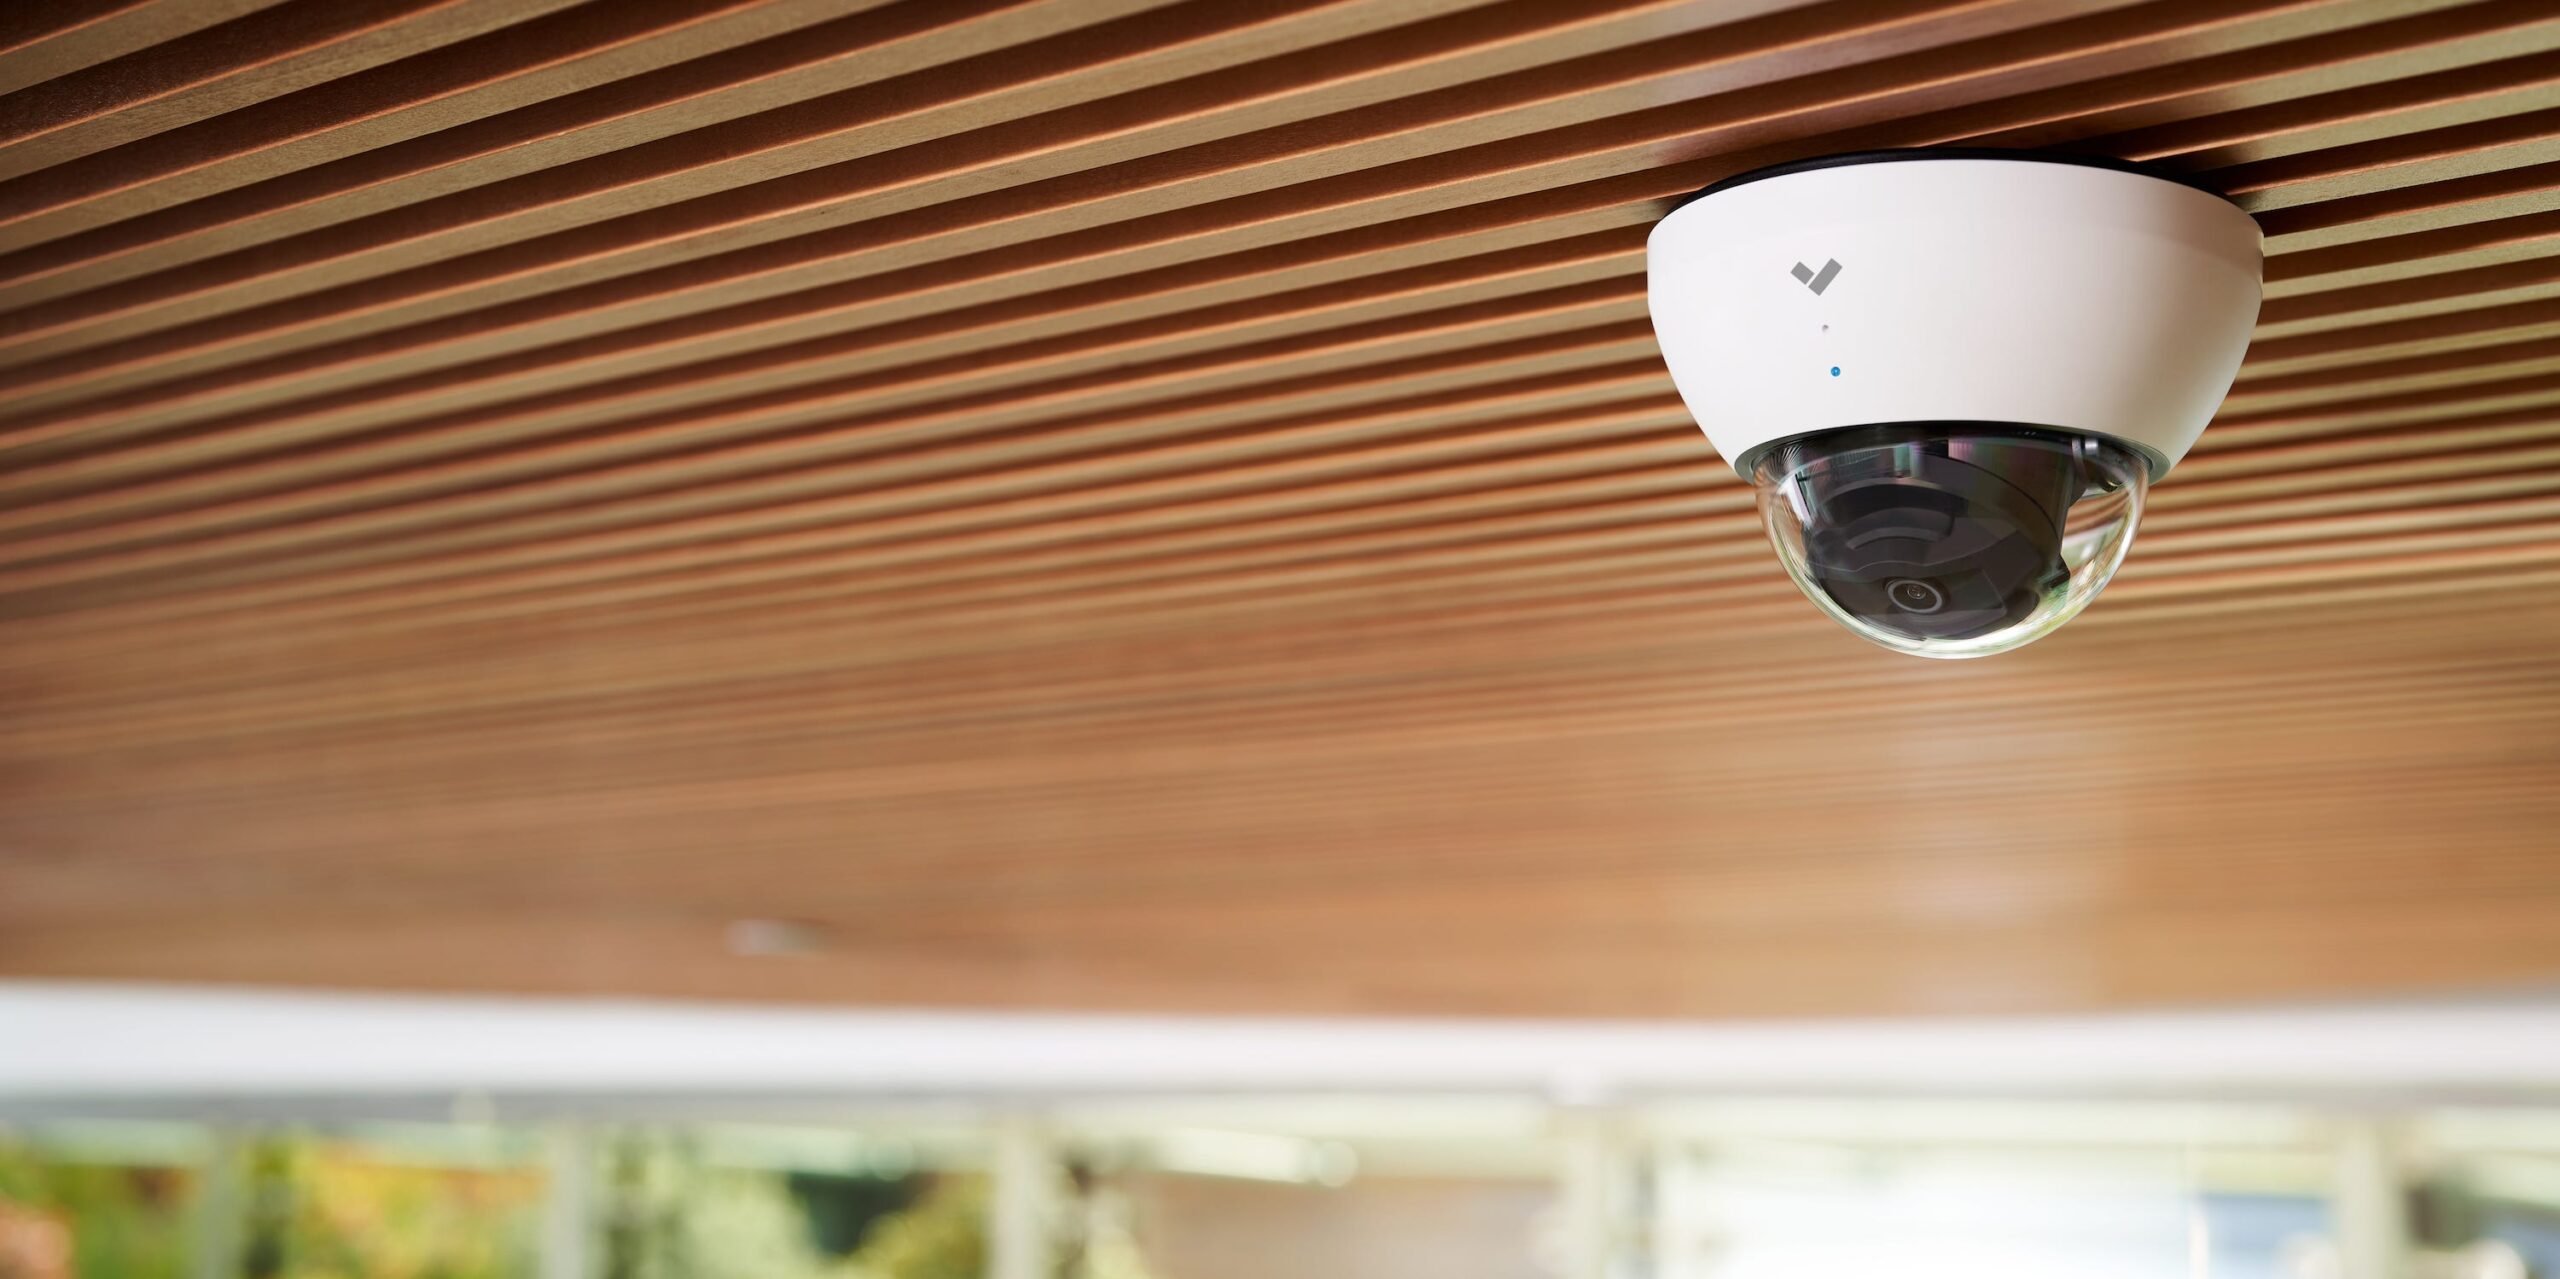 Verkada allowed at least 100 employees, including interns and sales staff, to access customers’ camera feeds